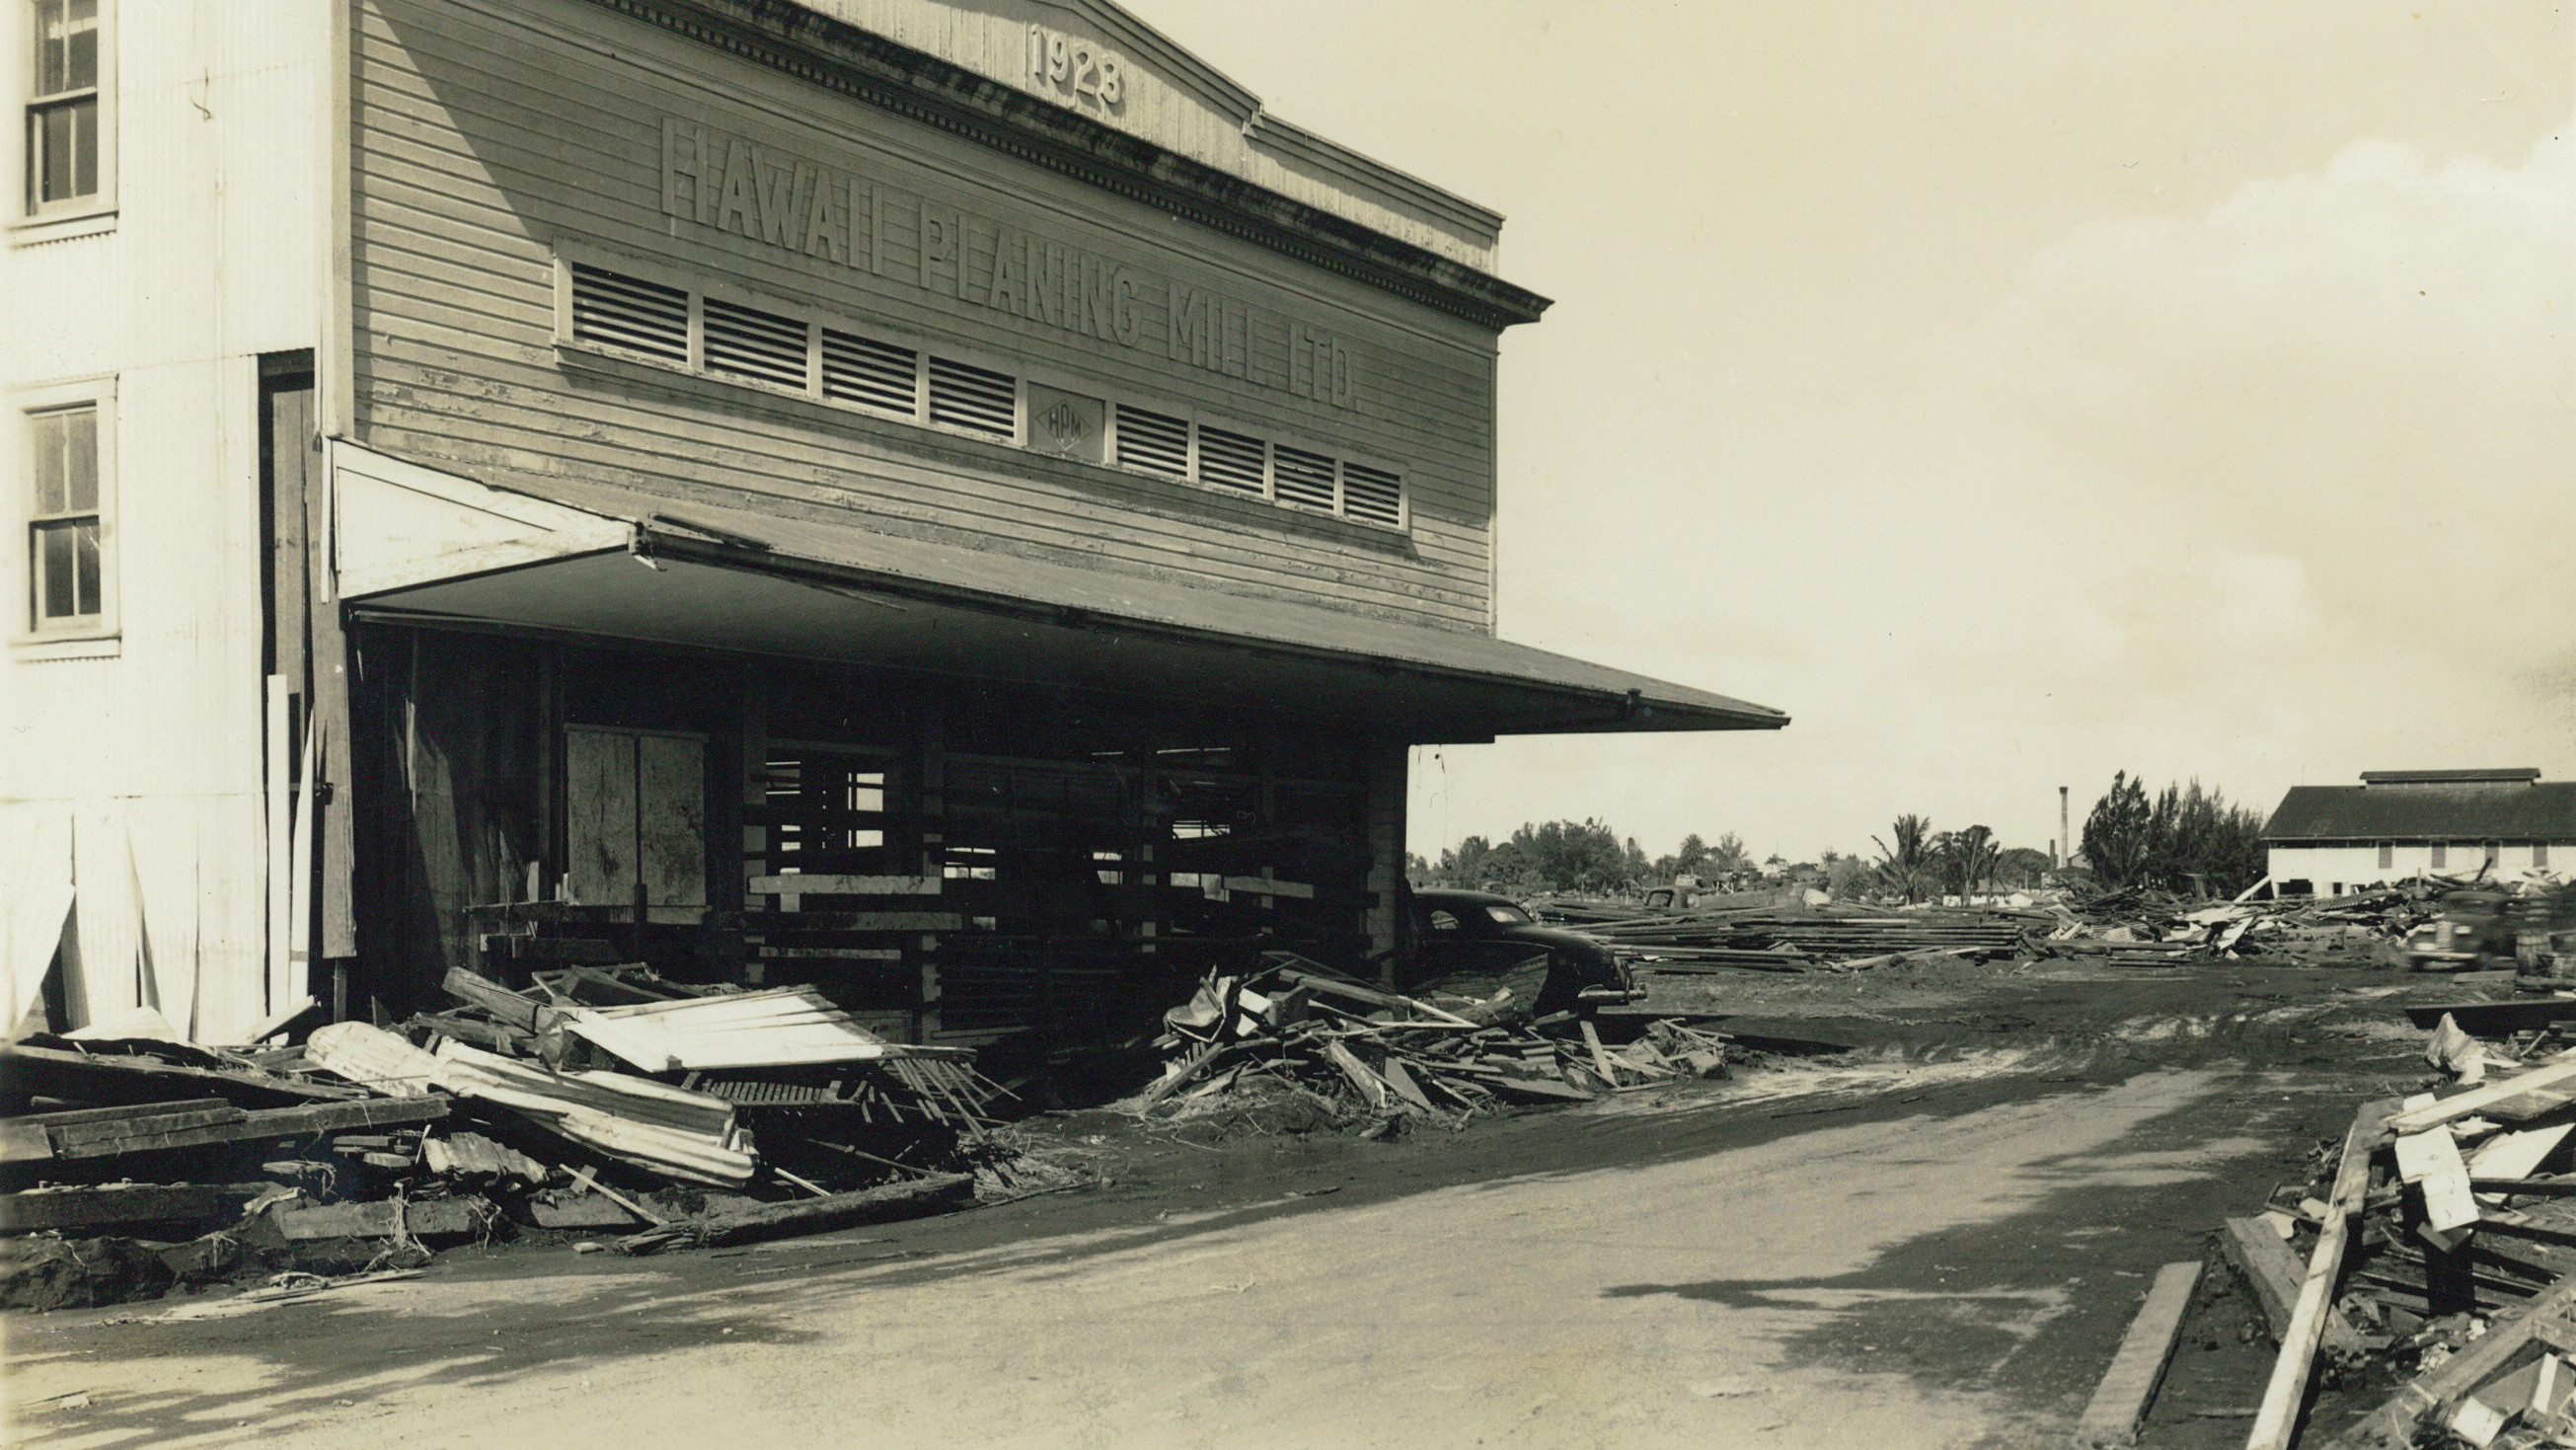 Damage to Hawaii Planing Mill was extensive but the building was still standing and the company was able to rebuild in a safer location. Photo courtesy of Hawaii Planing Mill Archives.